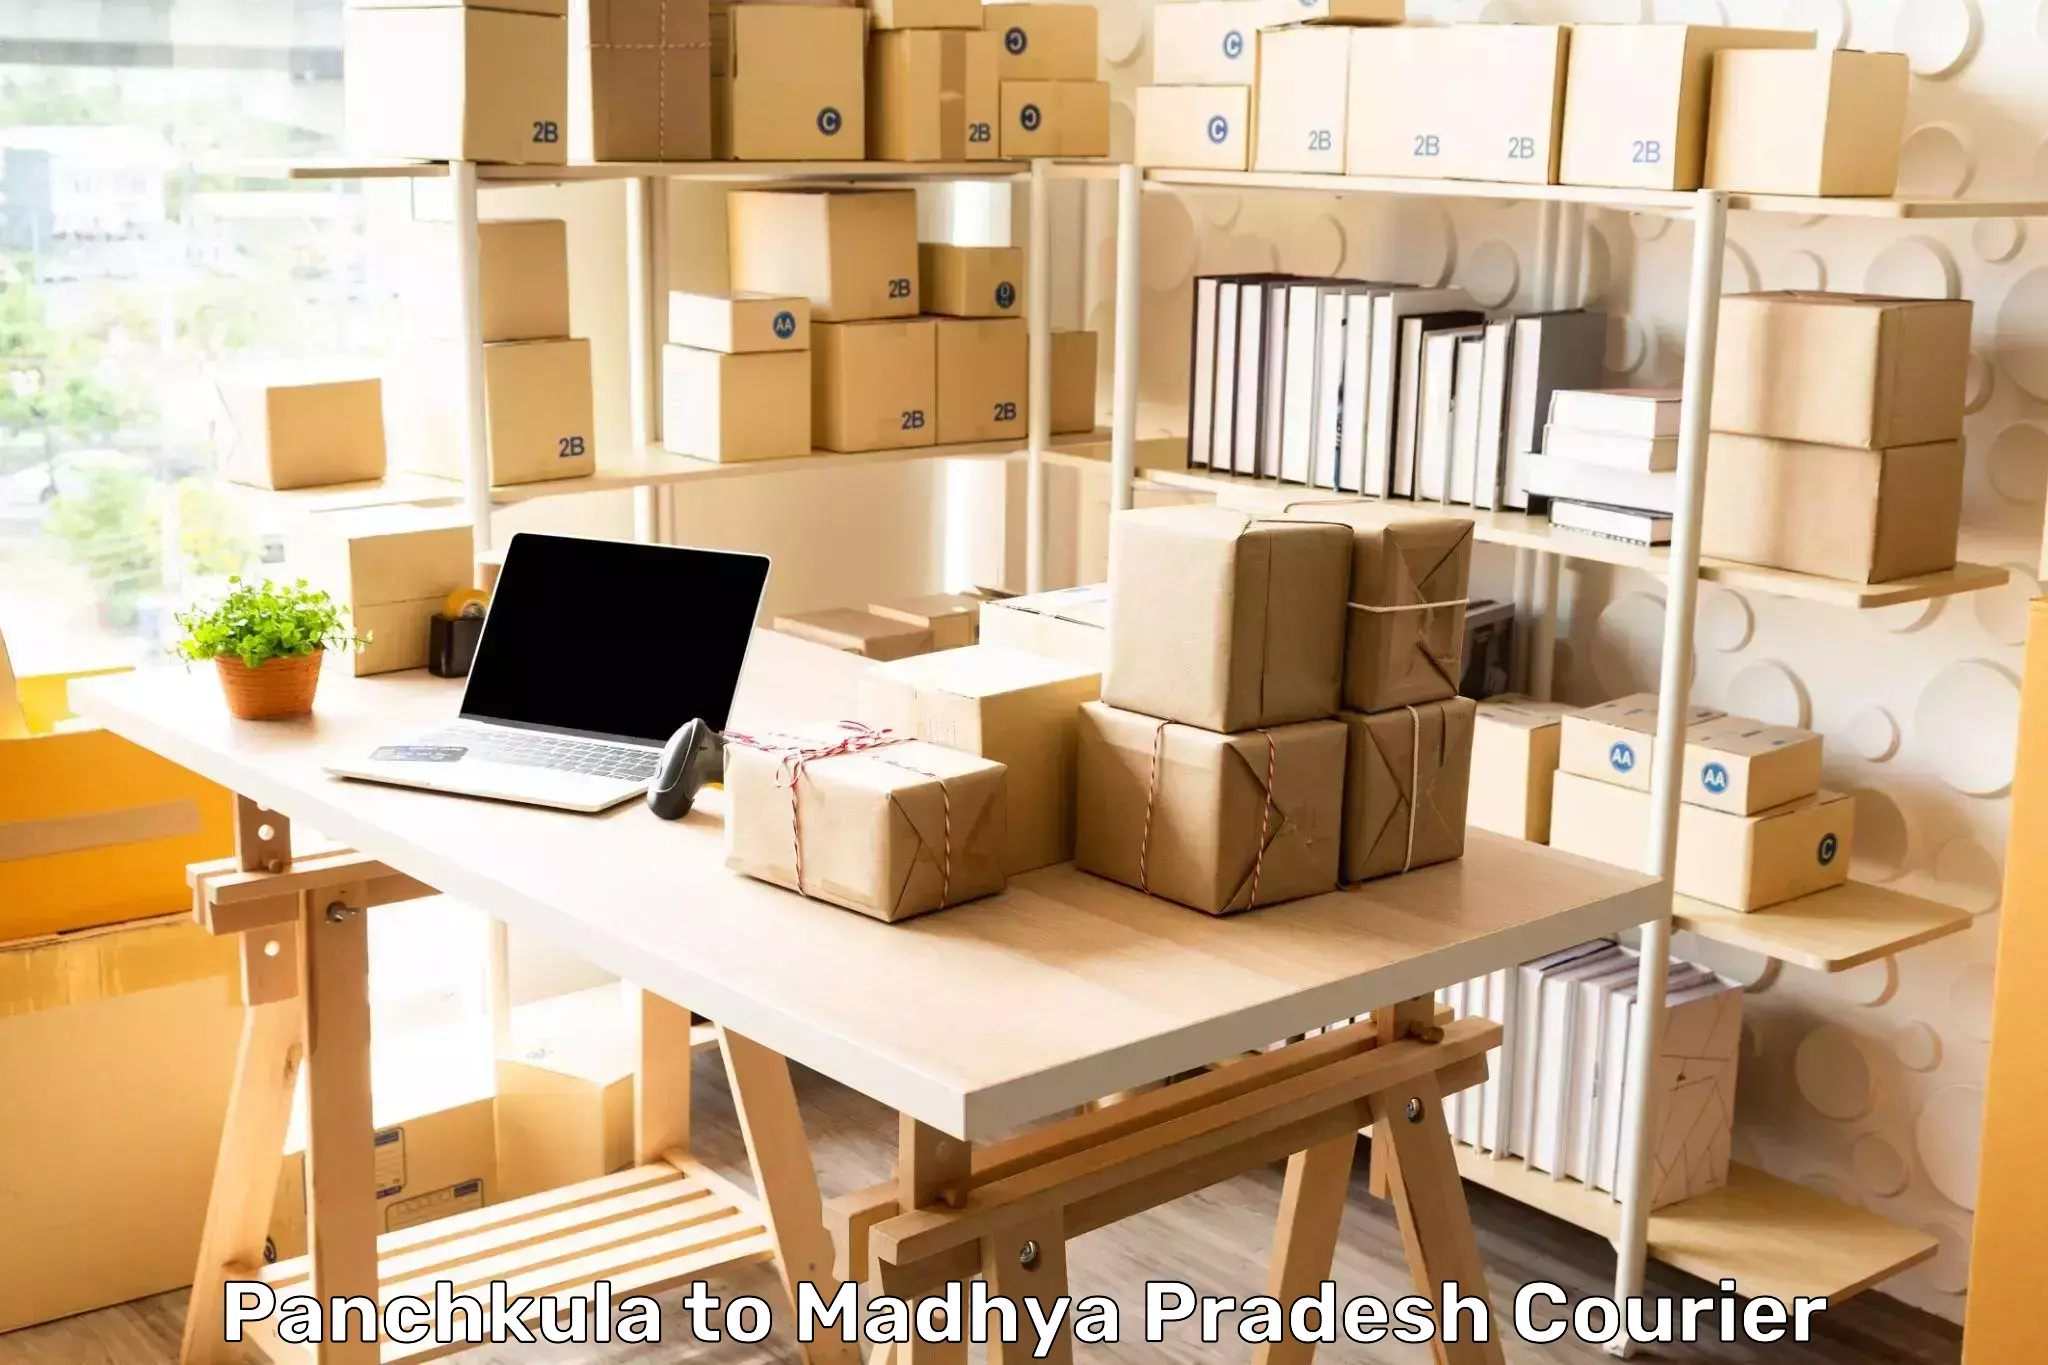 Easy access courier services Panchkula to Ghugri